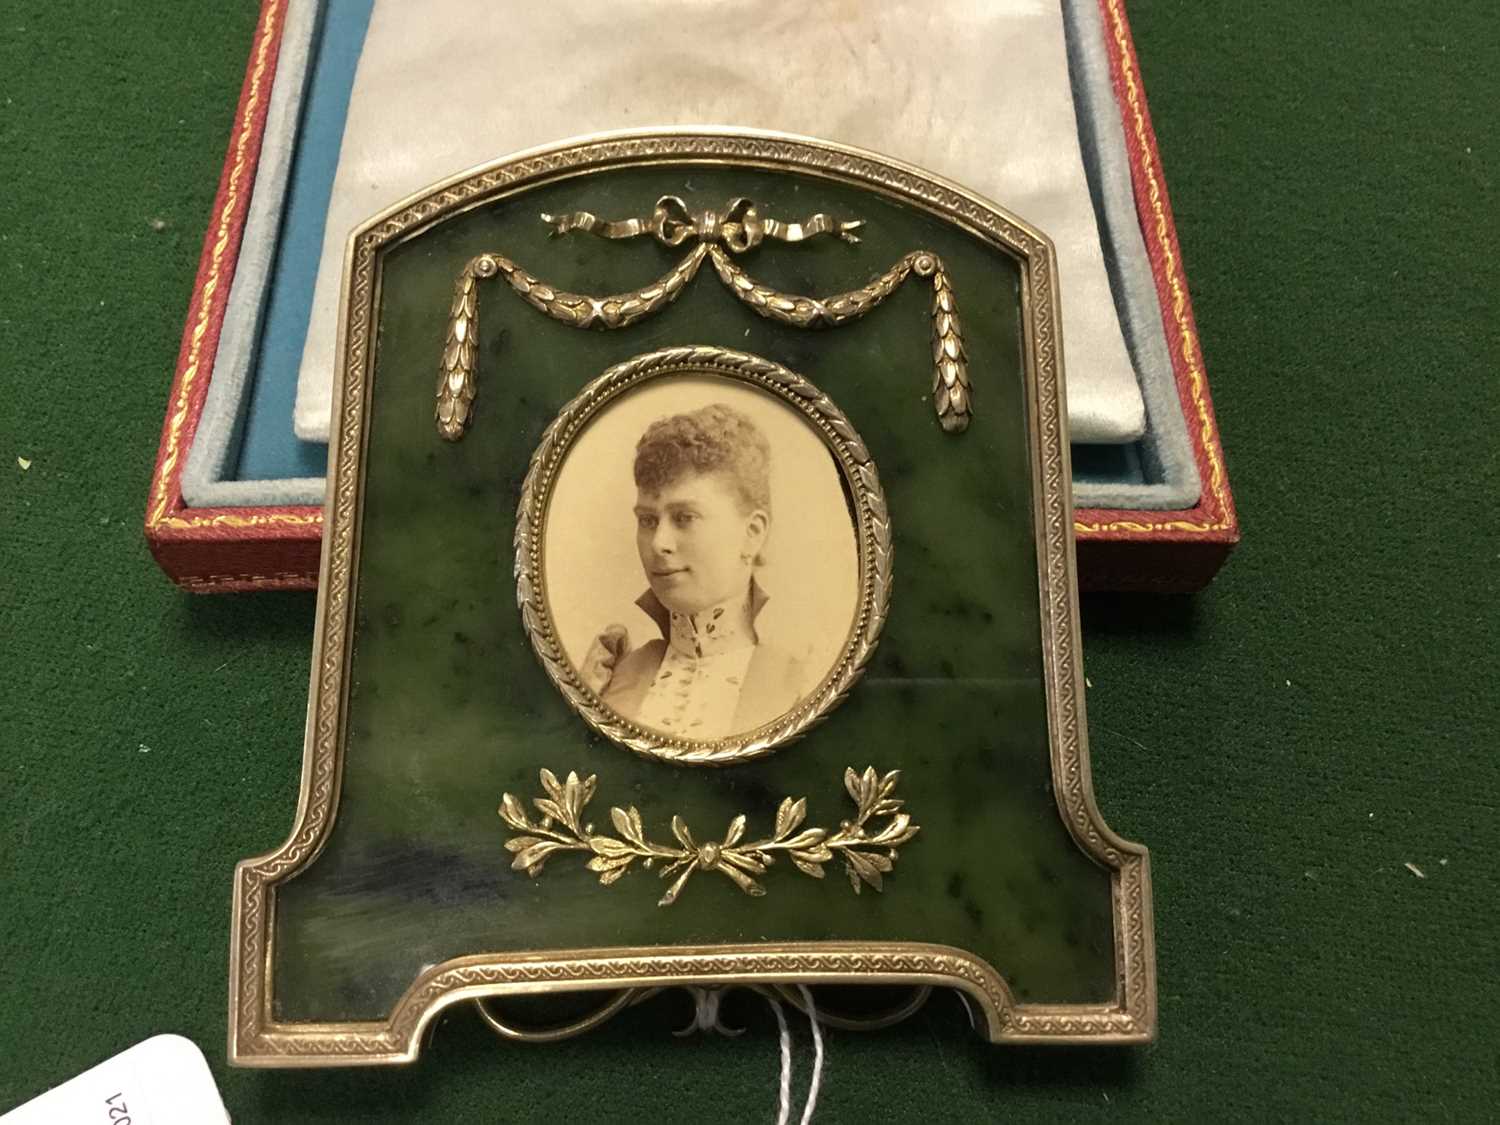 Fabergé-style silver gilt and green nephrite photograph frame containing an Edwardian portrait photo - Image 4 of 6